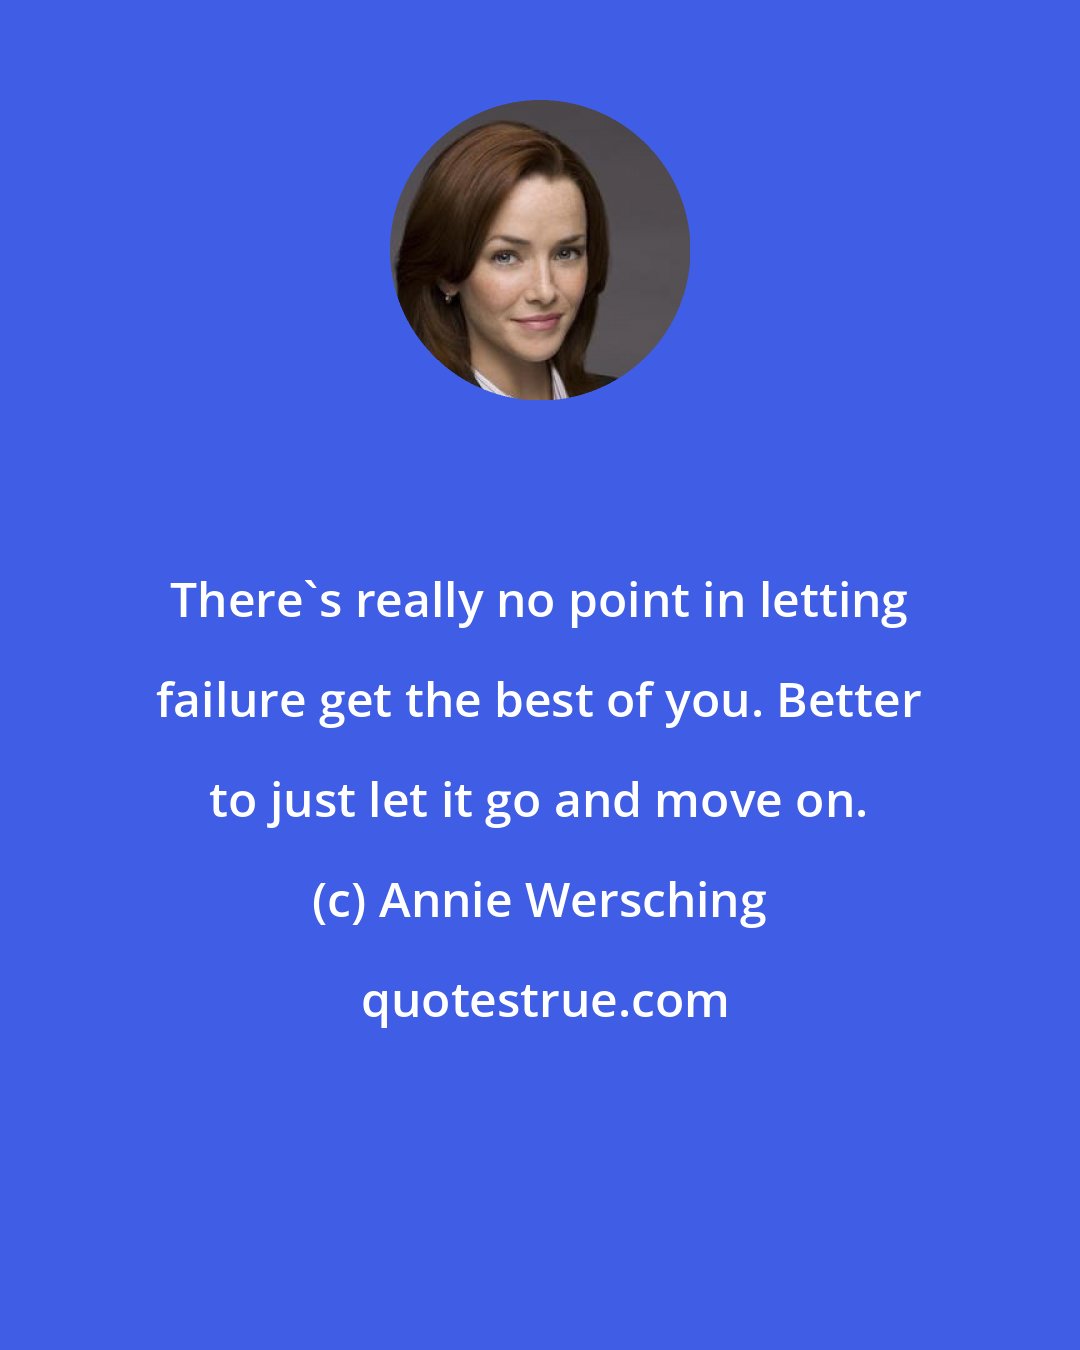 Annie Wersching: There's really no point in letting failure get the best of you. Better to just let it go and move on.